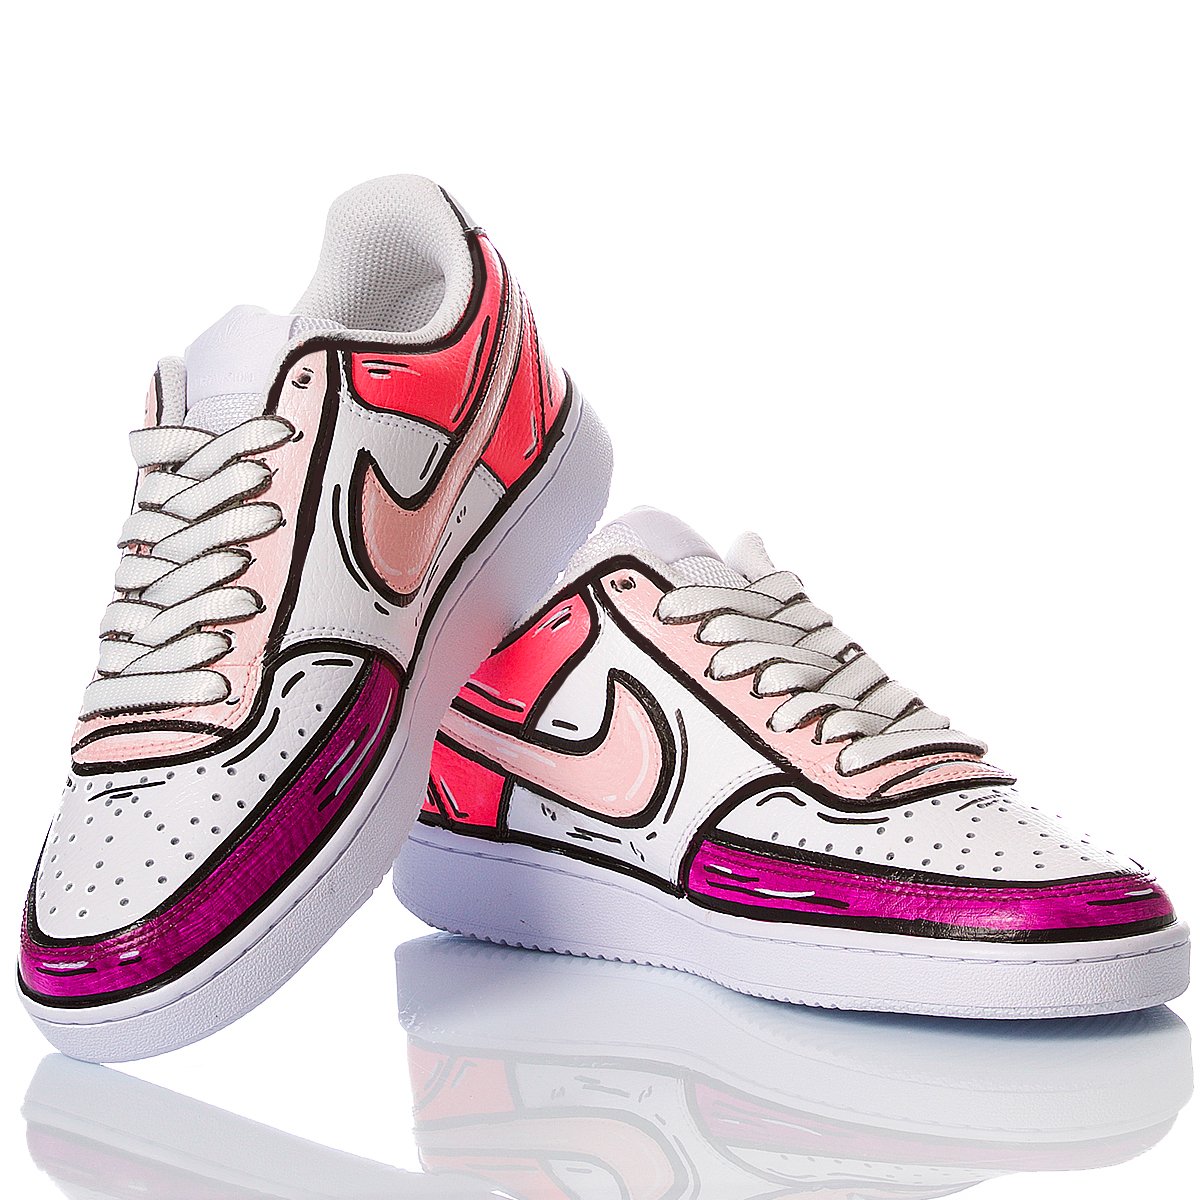 Nike Bubble Air force vision Special